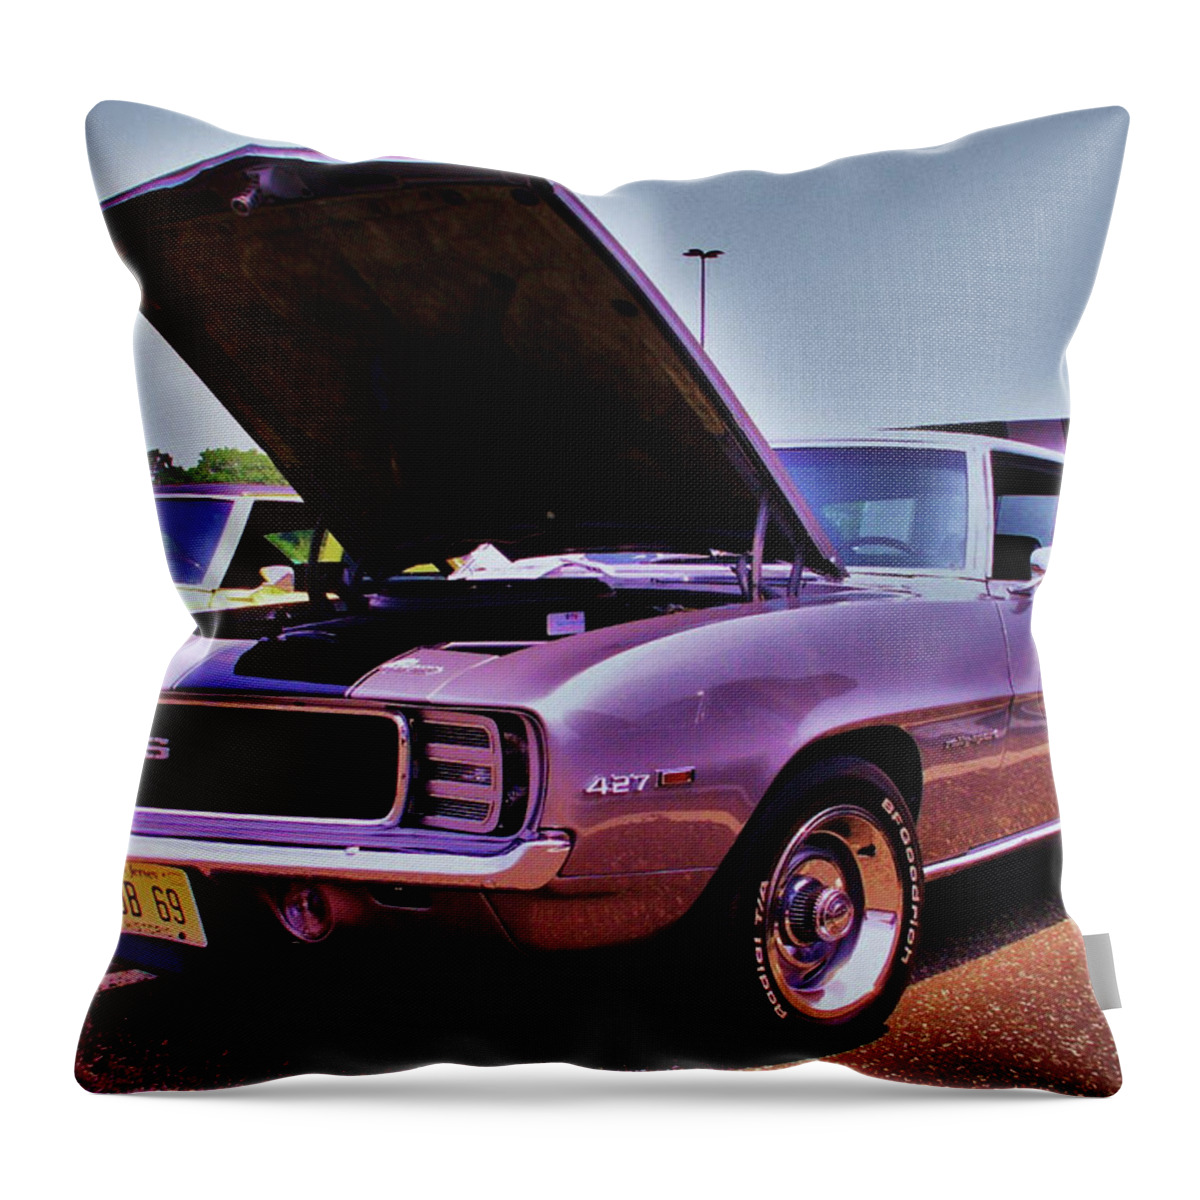 Cars Throw Pillow featuring the photograph Sittin' Pretty by Daniel Carvalho